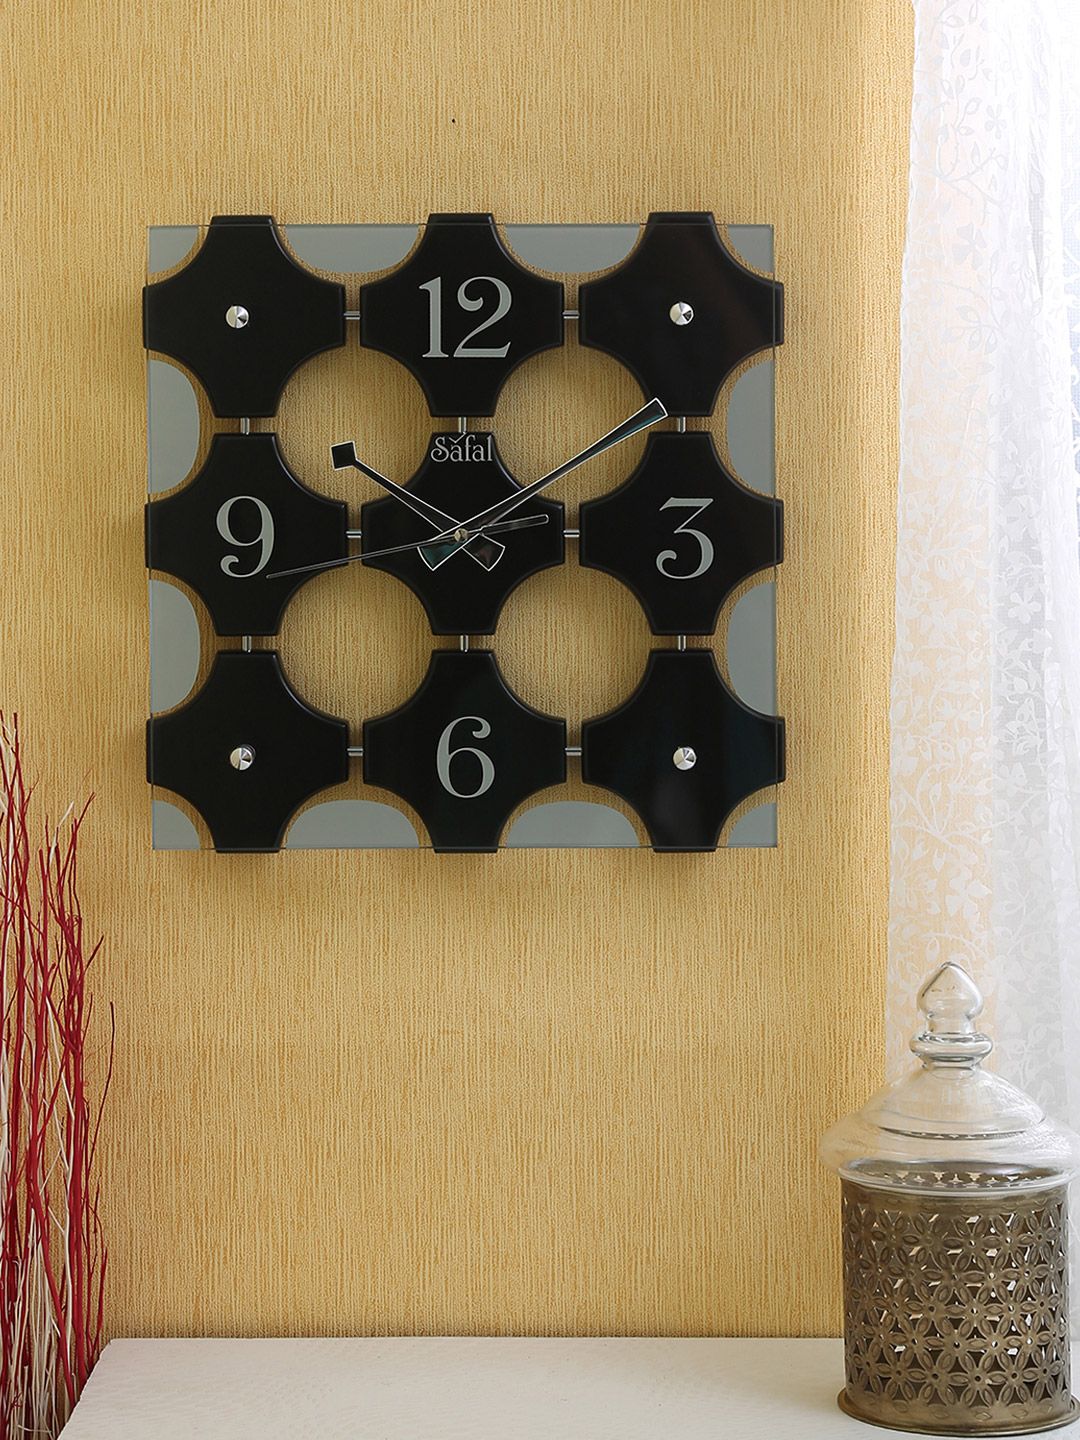 Safal Black Solid Dial Square Analogue Wall Clock Price in India